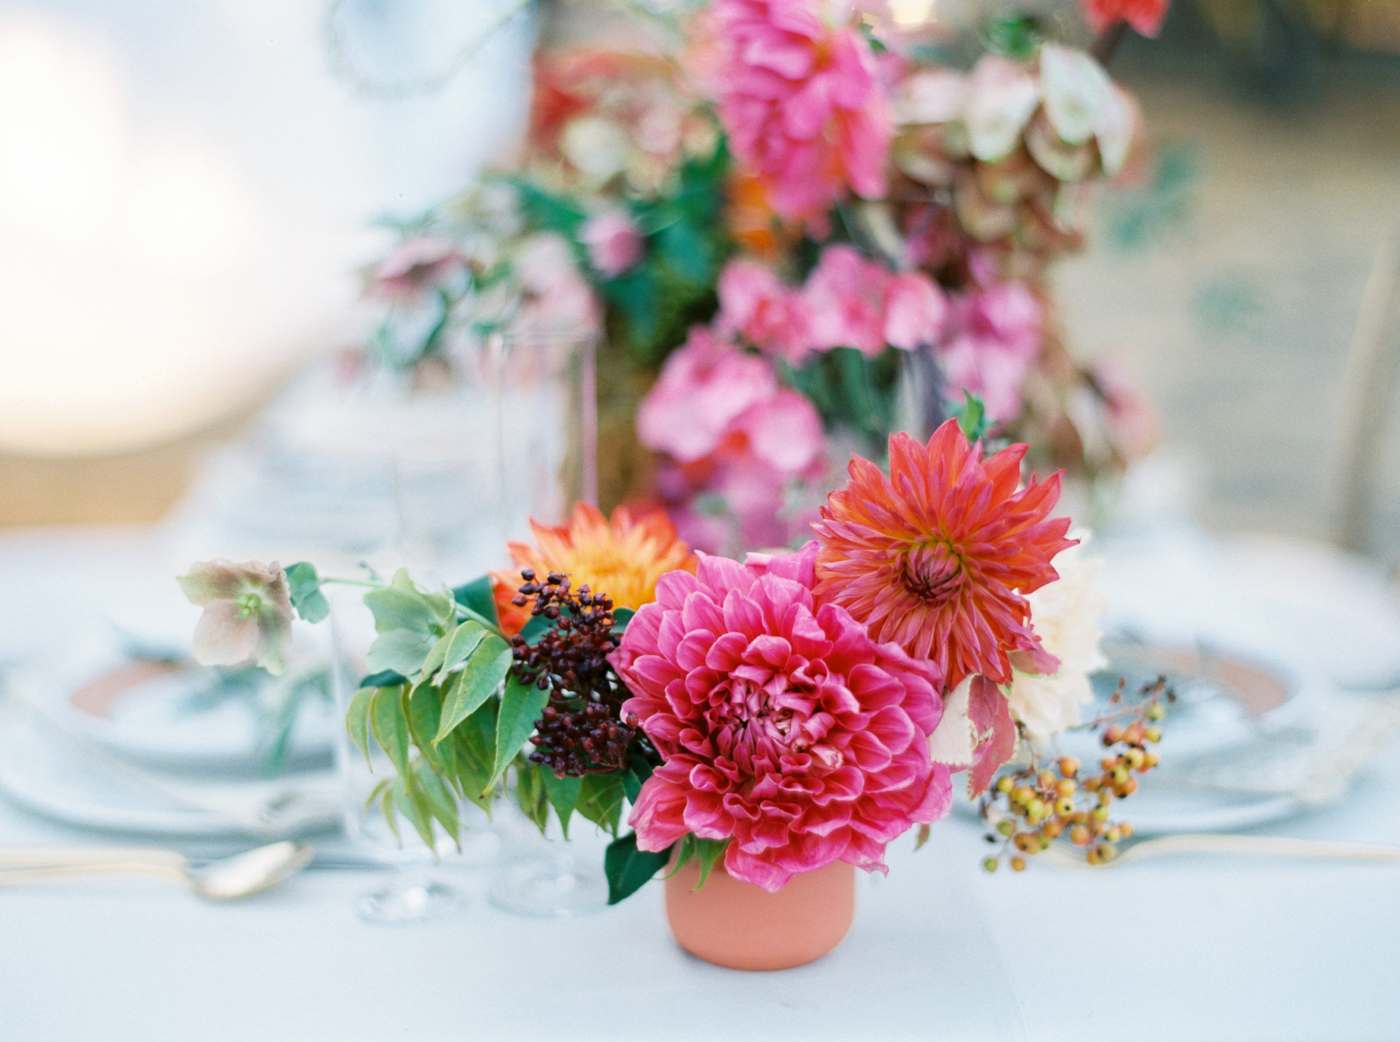 Autumn deco with flowers in smaller vase combine dahlias and chrysanthemums and blueberries